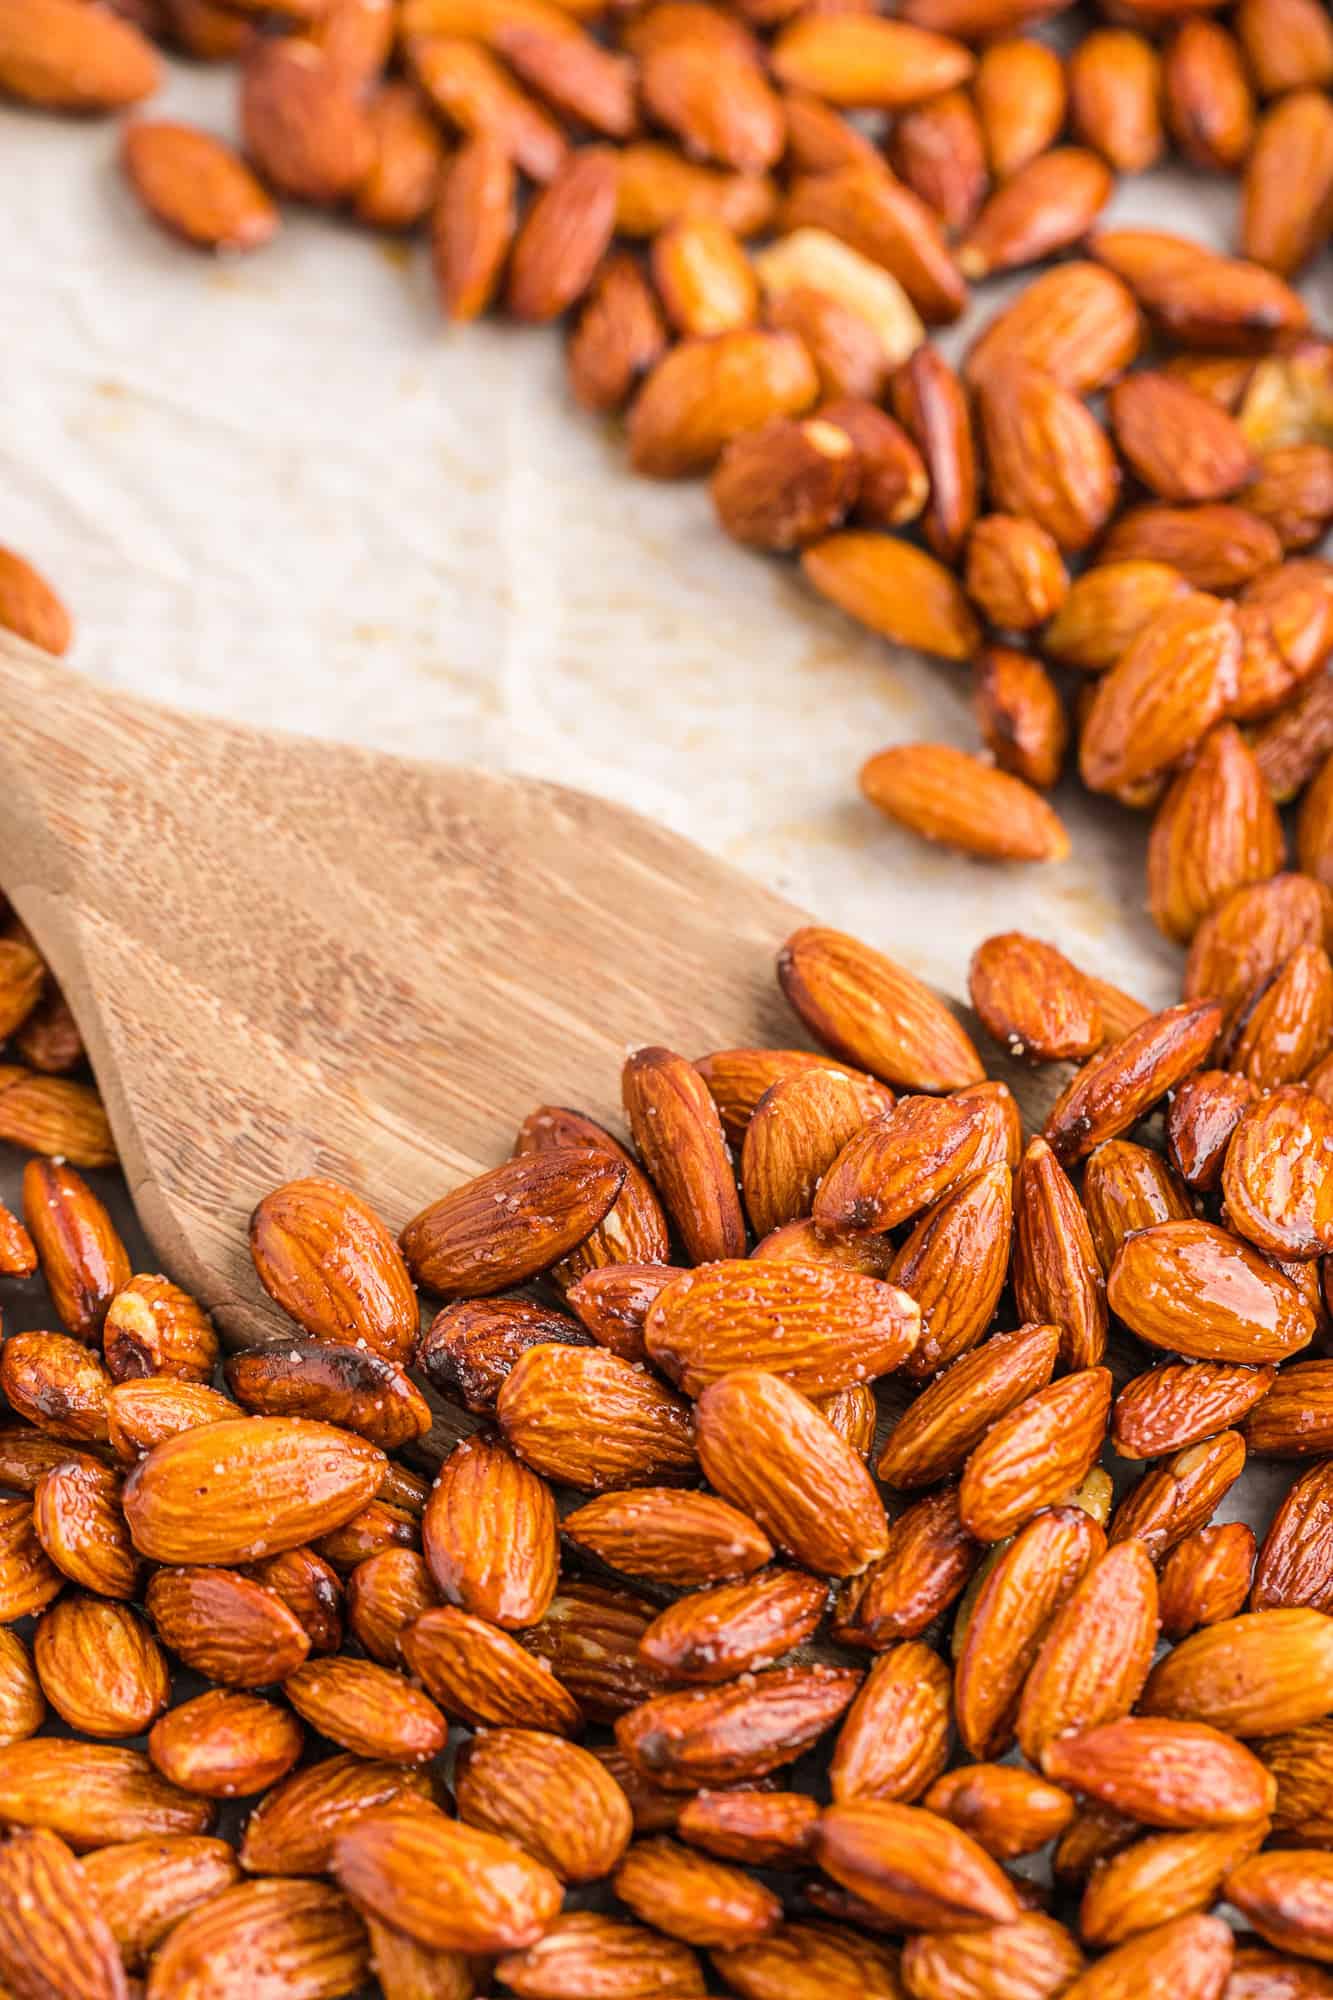 Almonds on a tray with a wooden spatula.